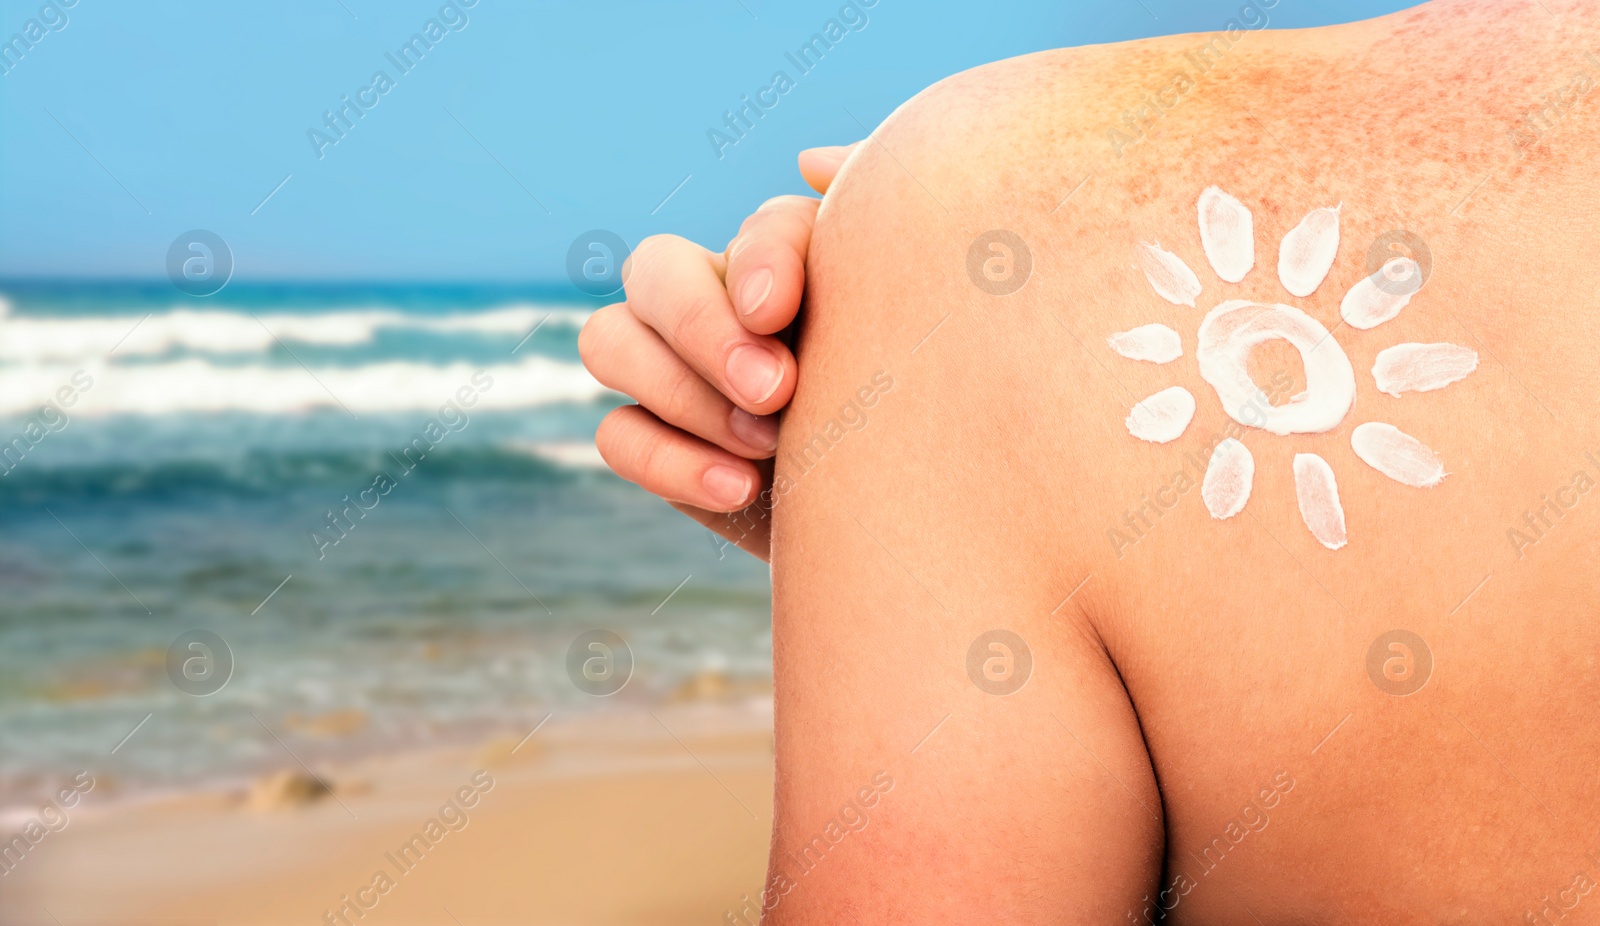 Image of Sun protection. Woman with sunblock on her back near sea, closeup